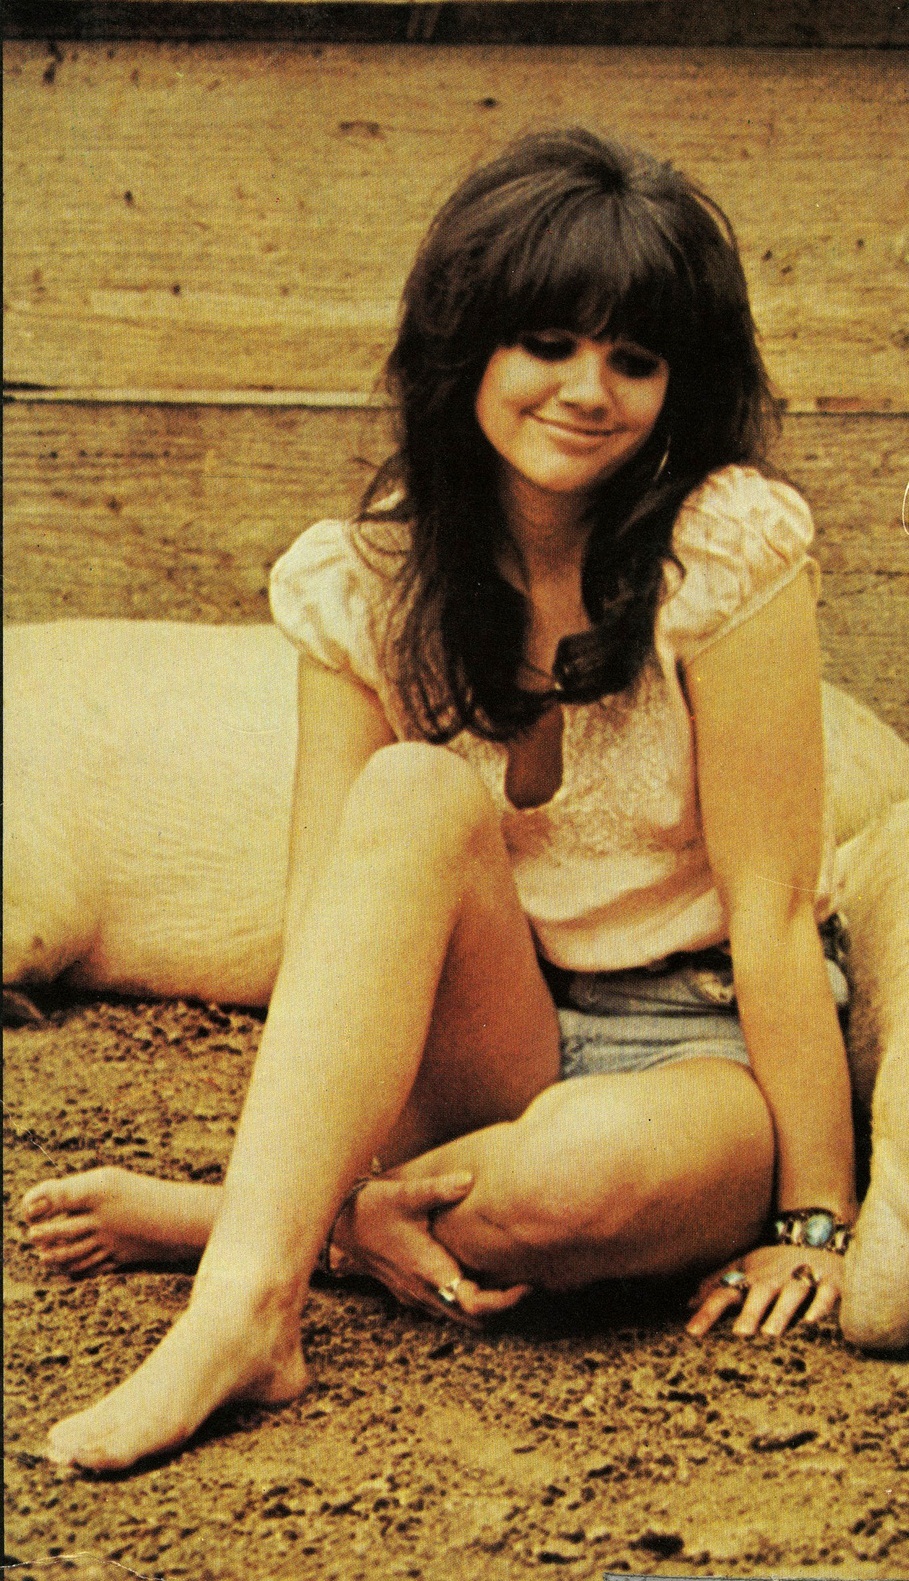 People who liked Linda Ronstadt's feet, also liked.